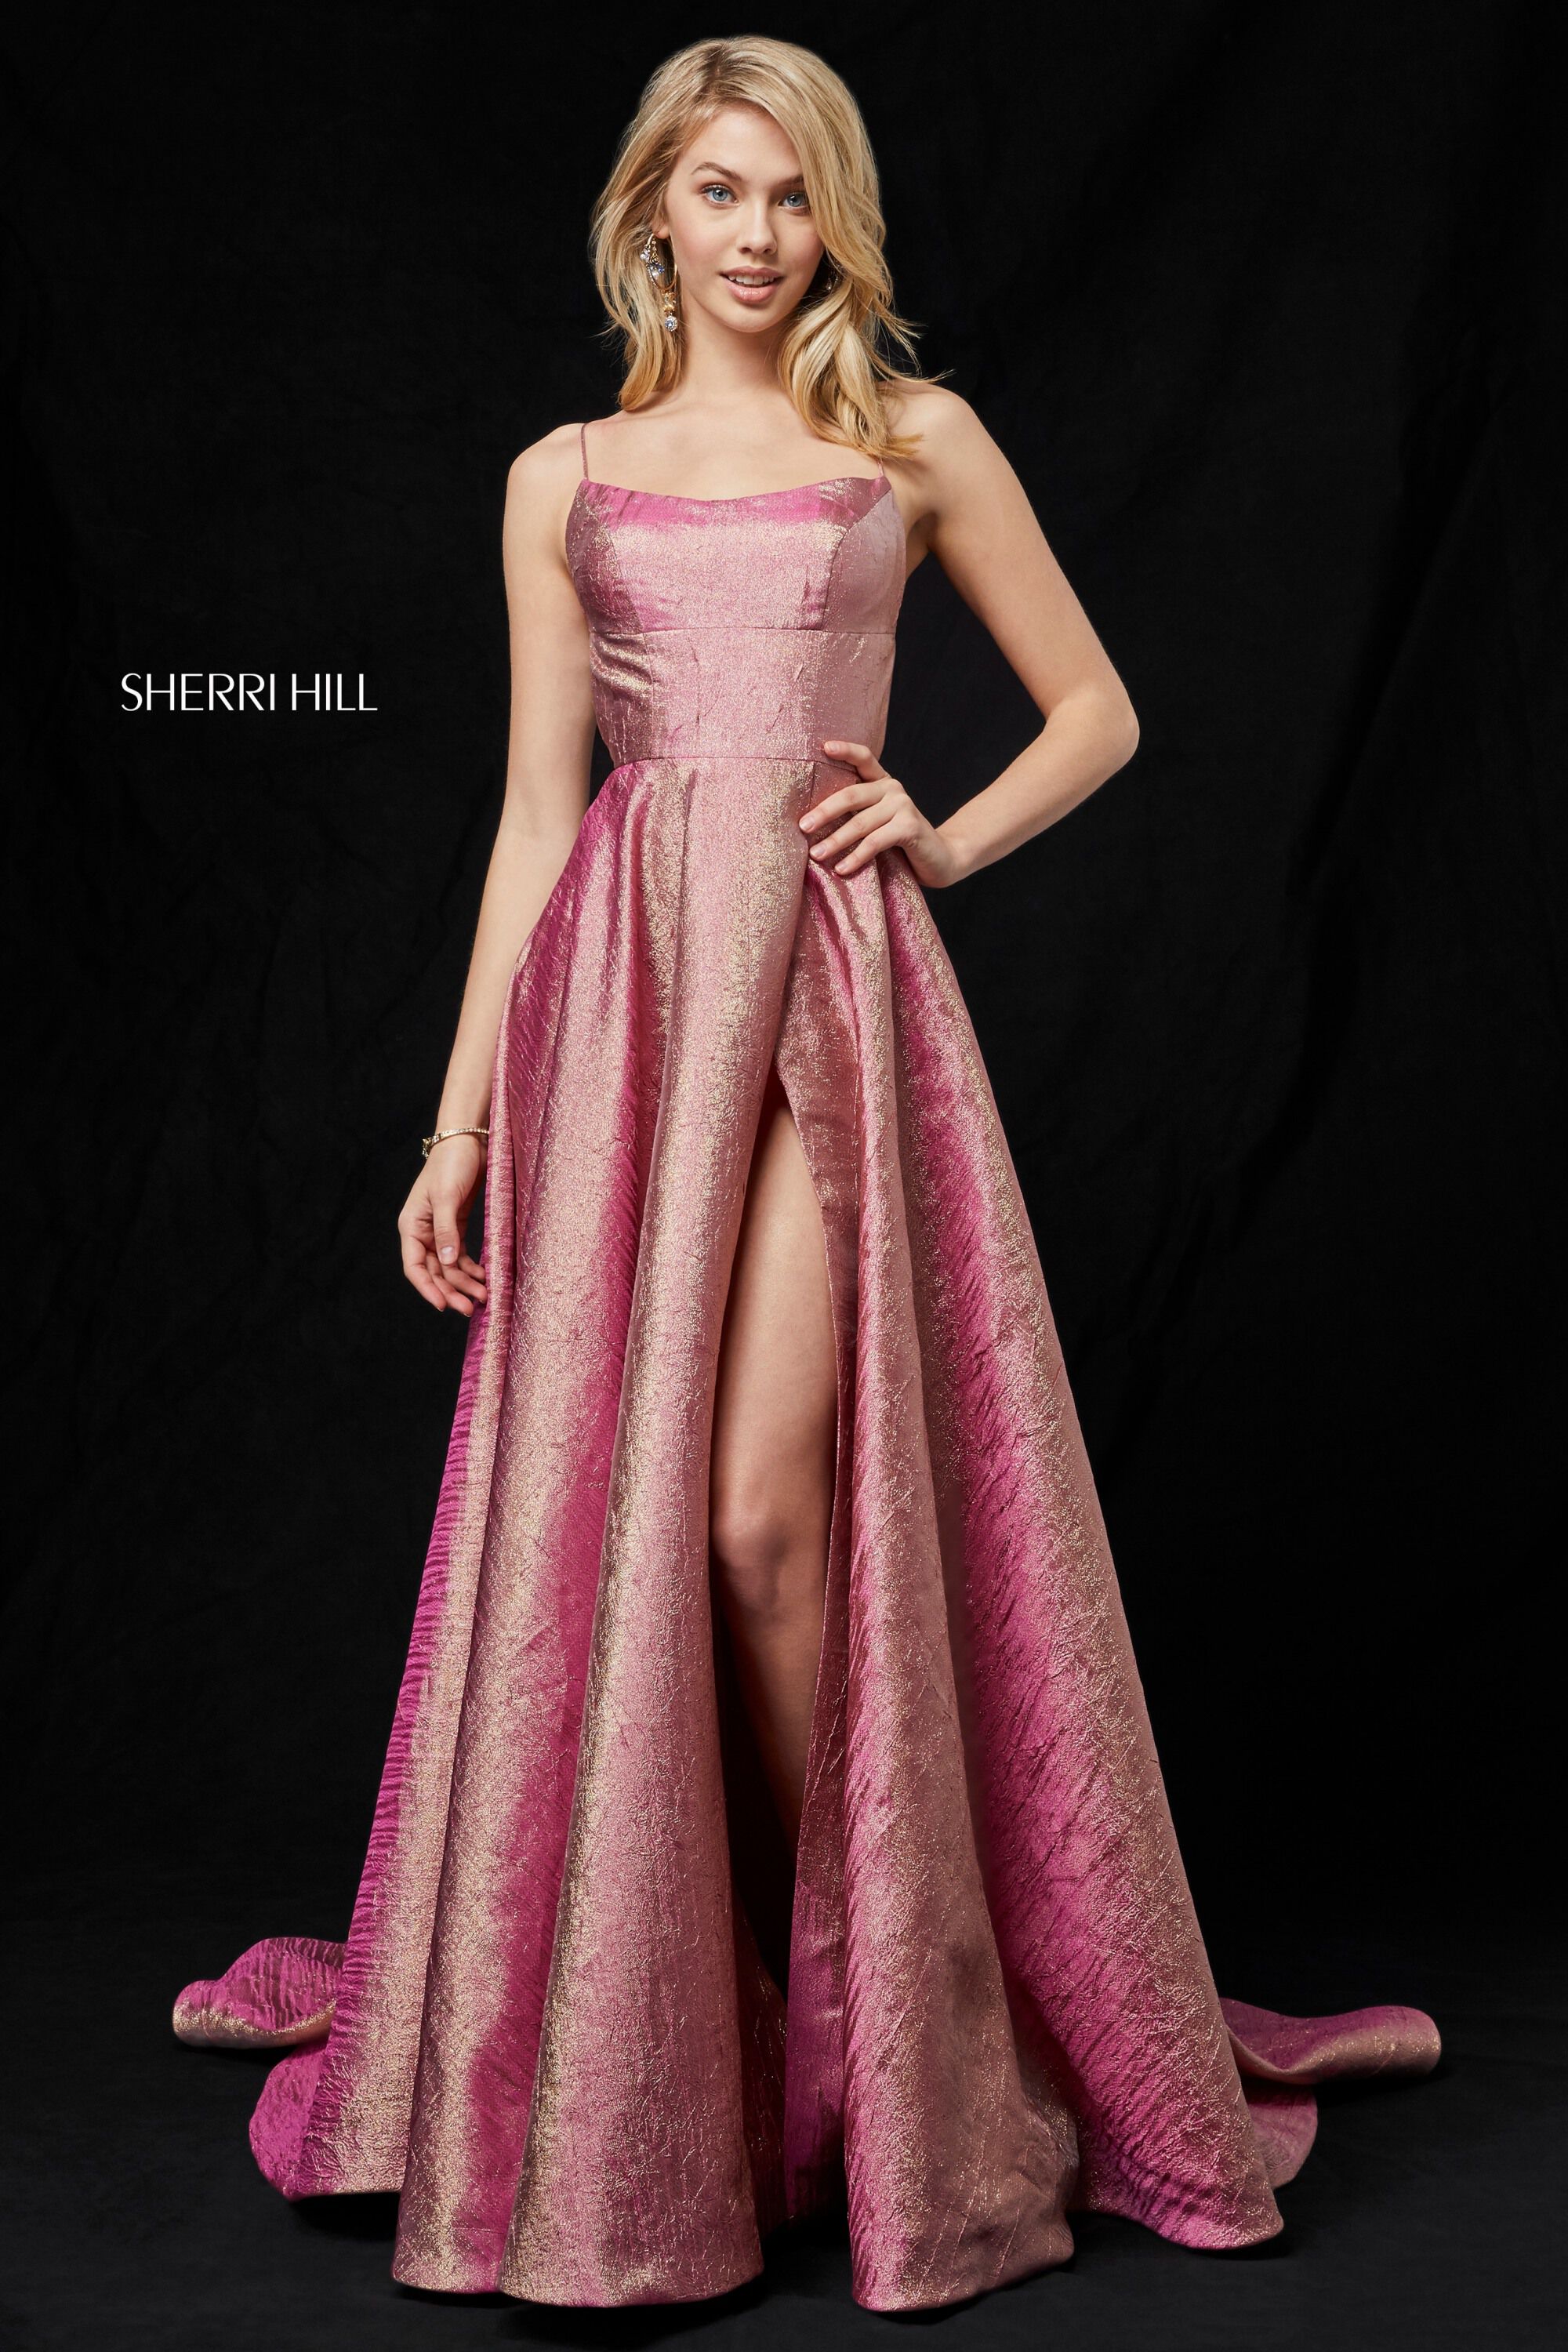 style № 52140 designed by SherriHill